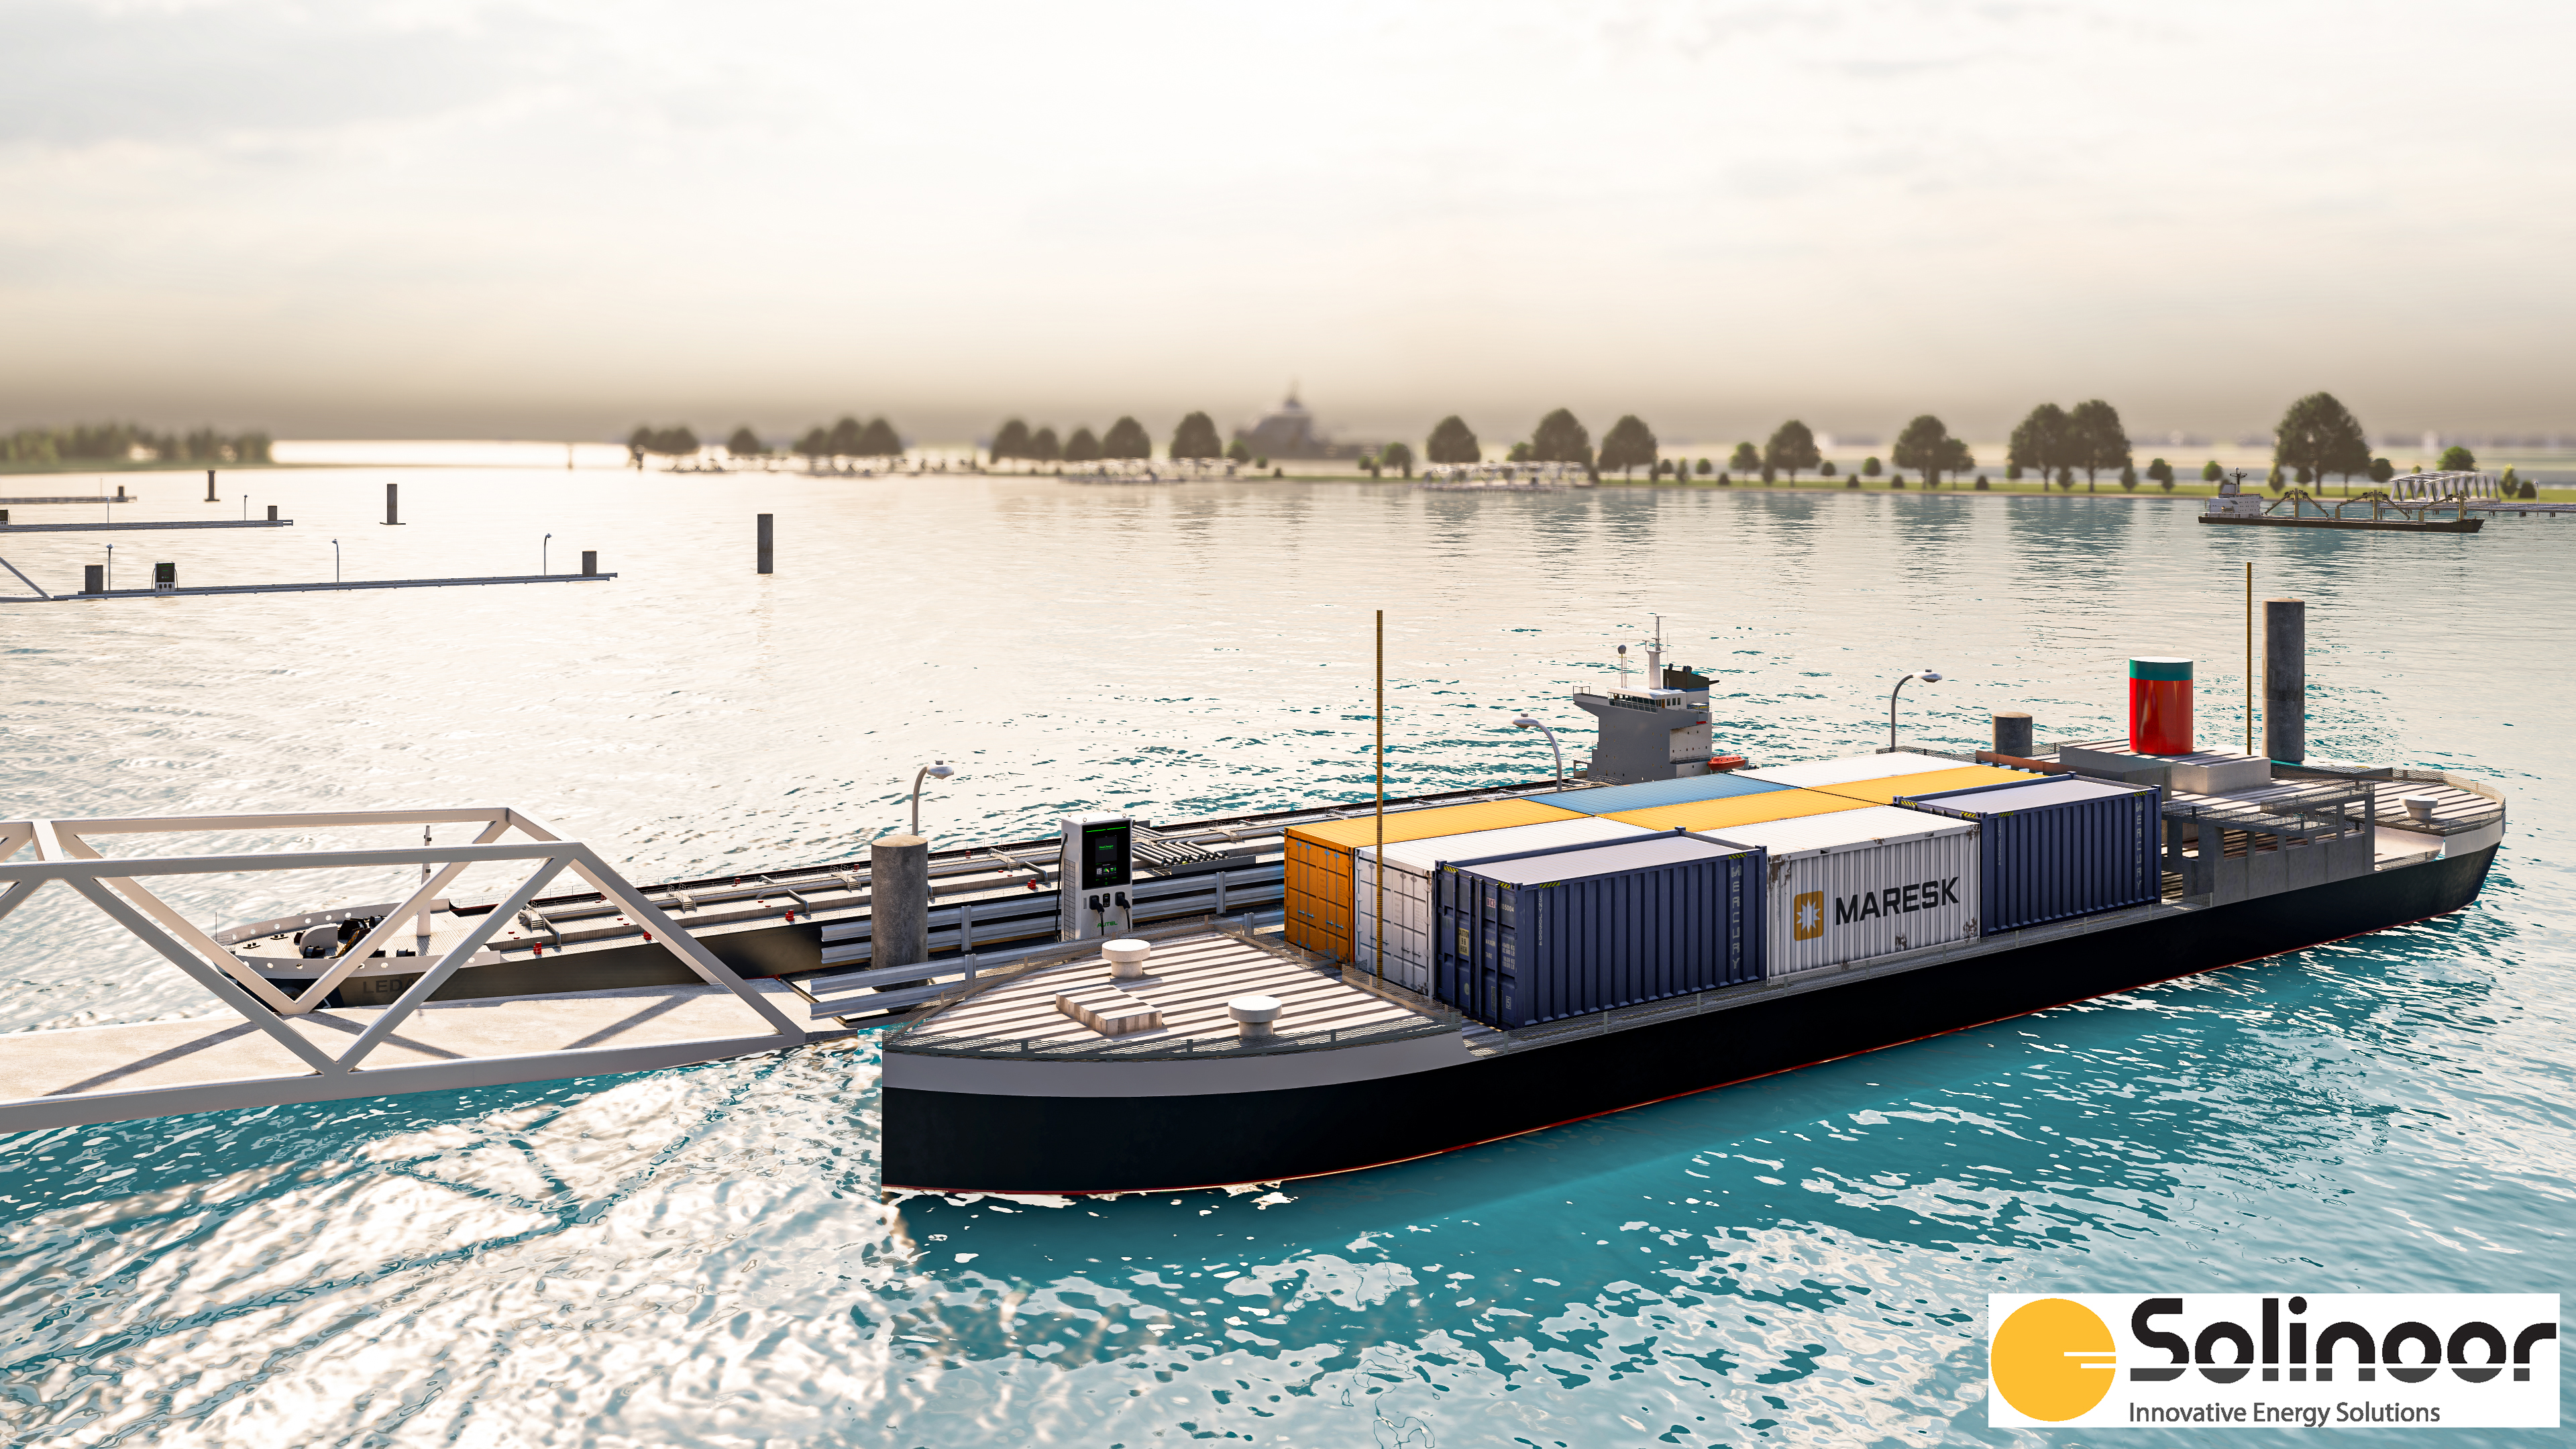 Sustainable shore power for ships